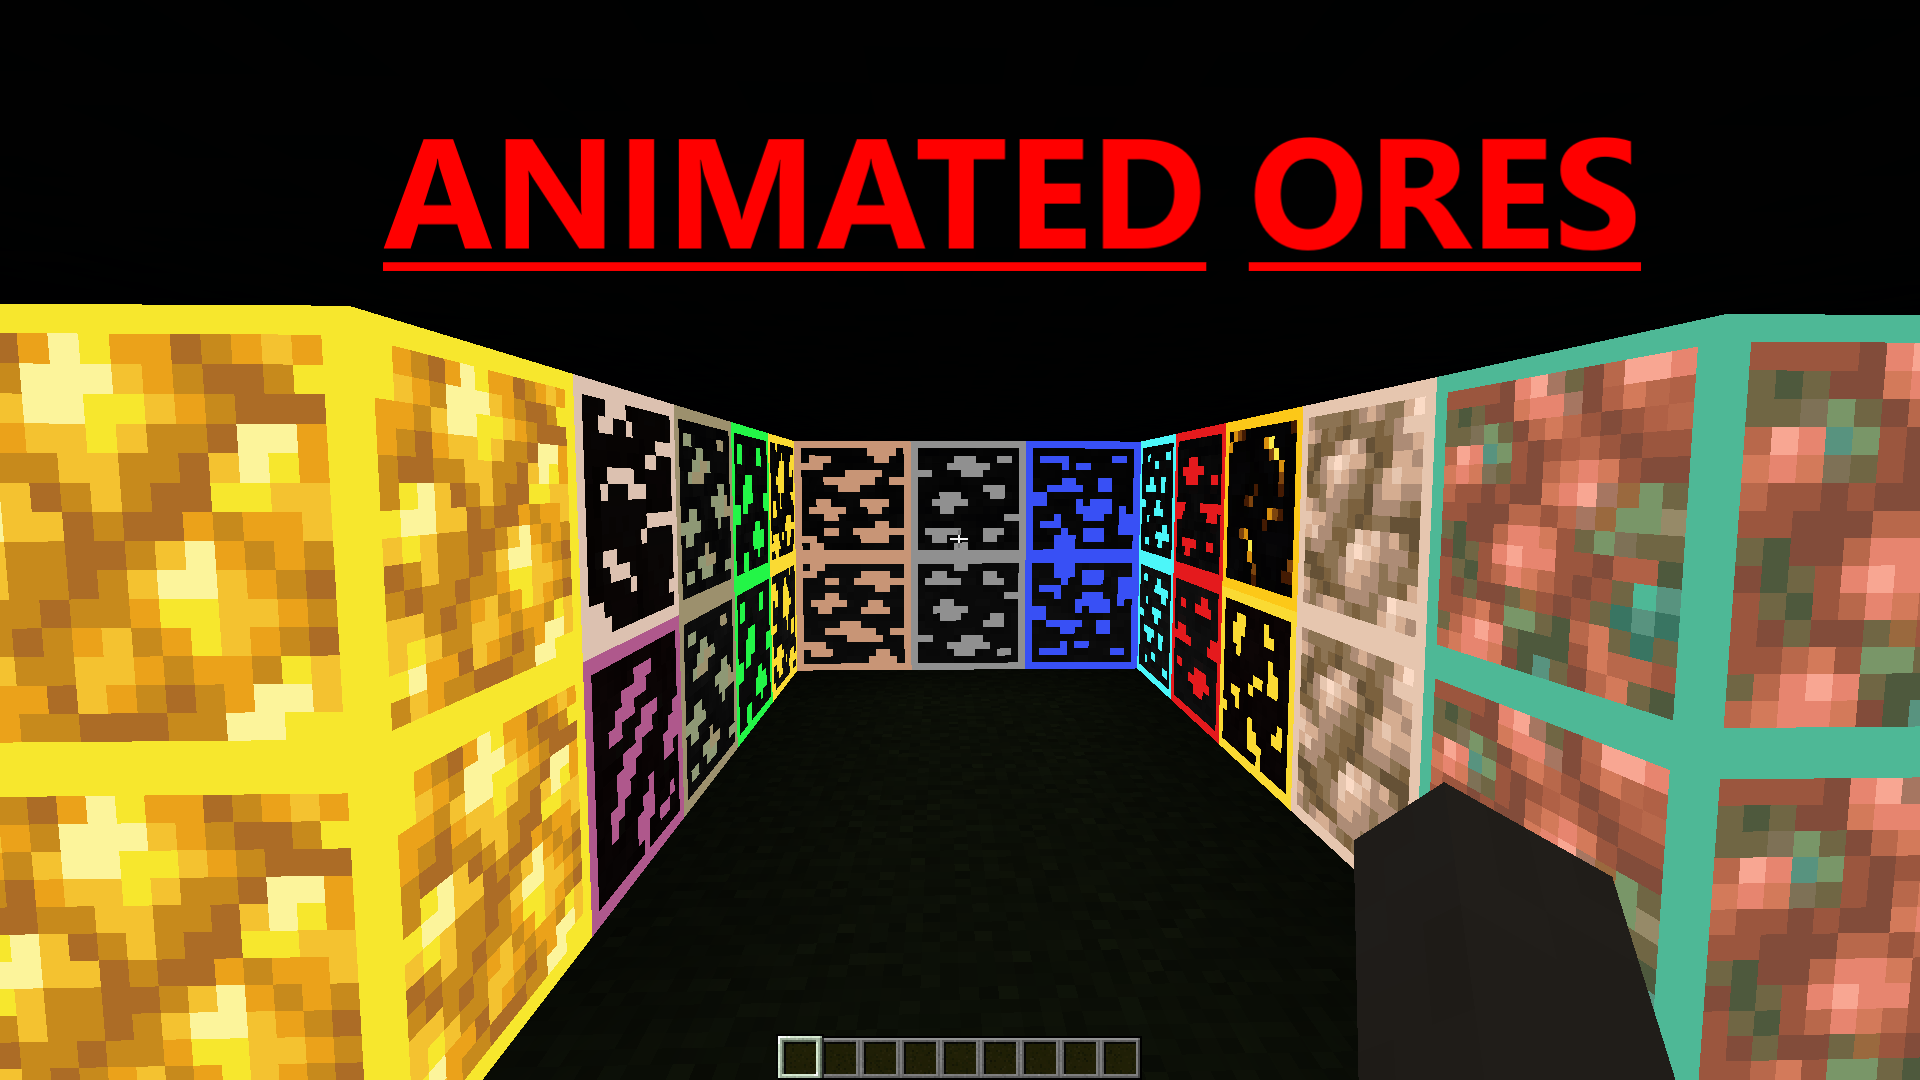 all ores glow in dark with animation